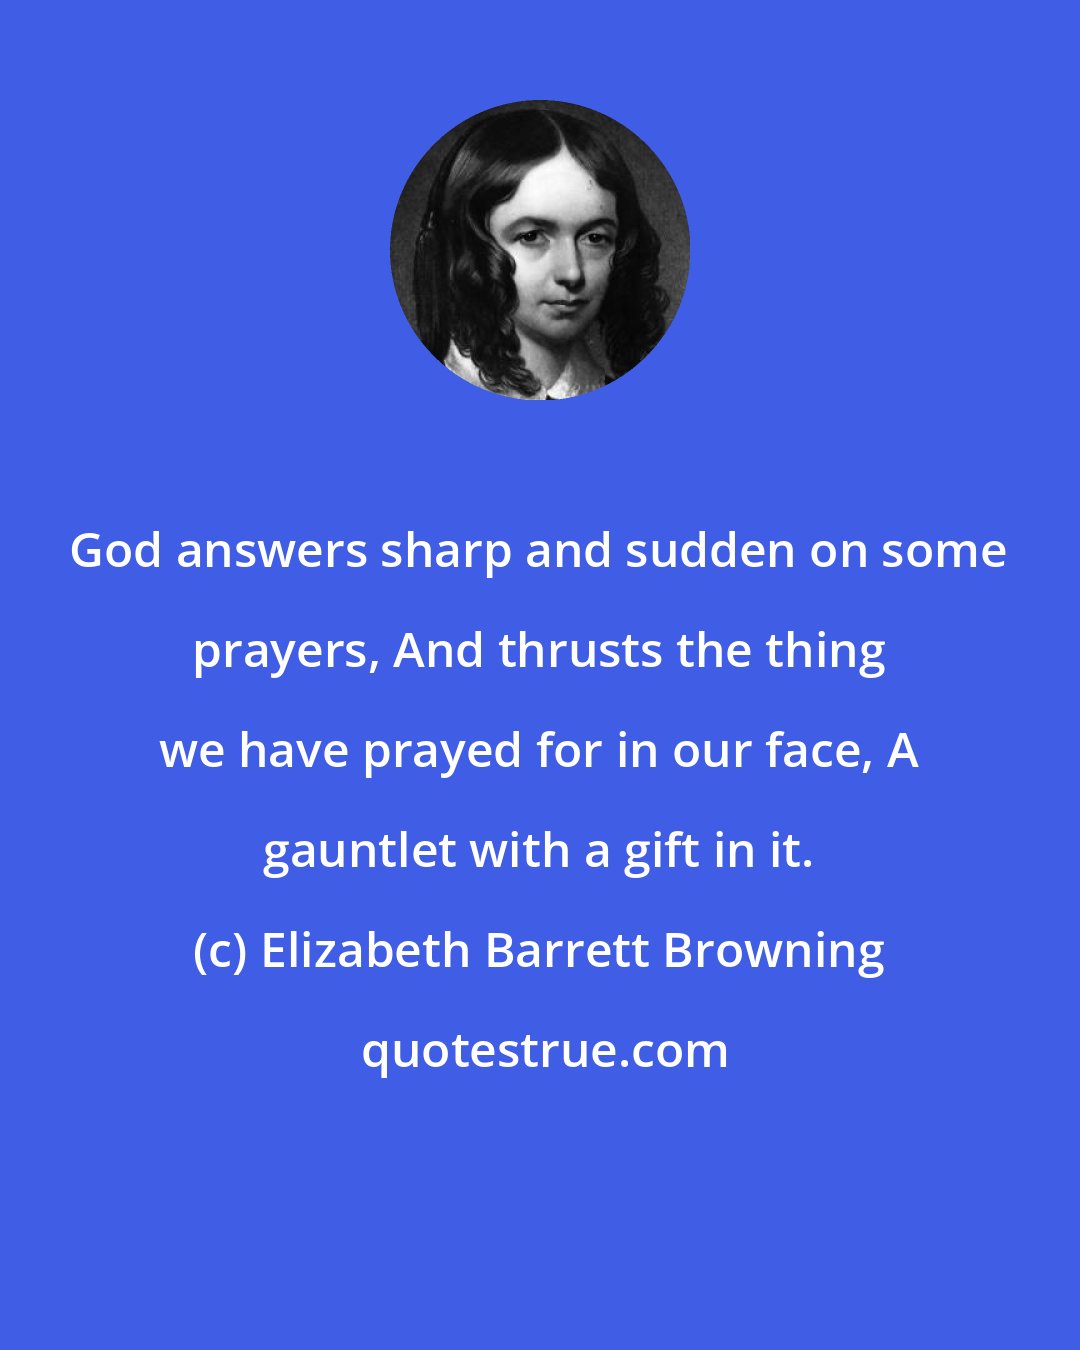 Elizabeth Barrett Browning: God answers sharp and sudden on some prayers, And thrusts the thing we have prayed for in our face, A gauntlet with a gift in it.